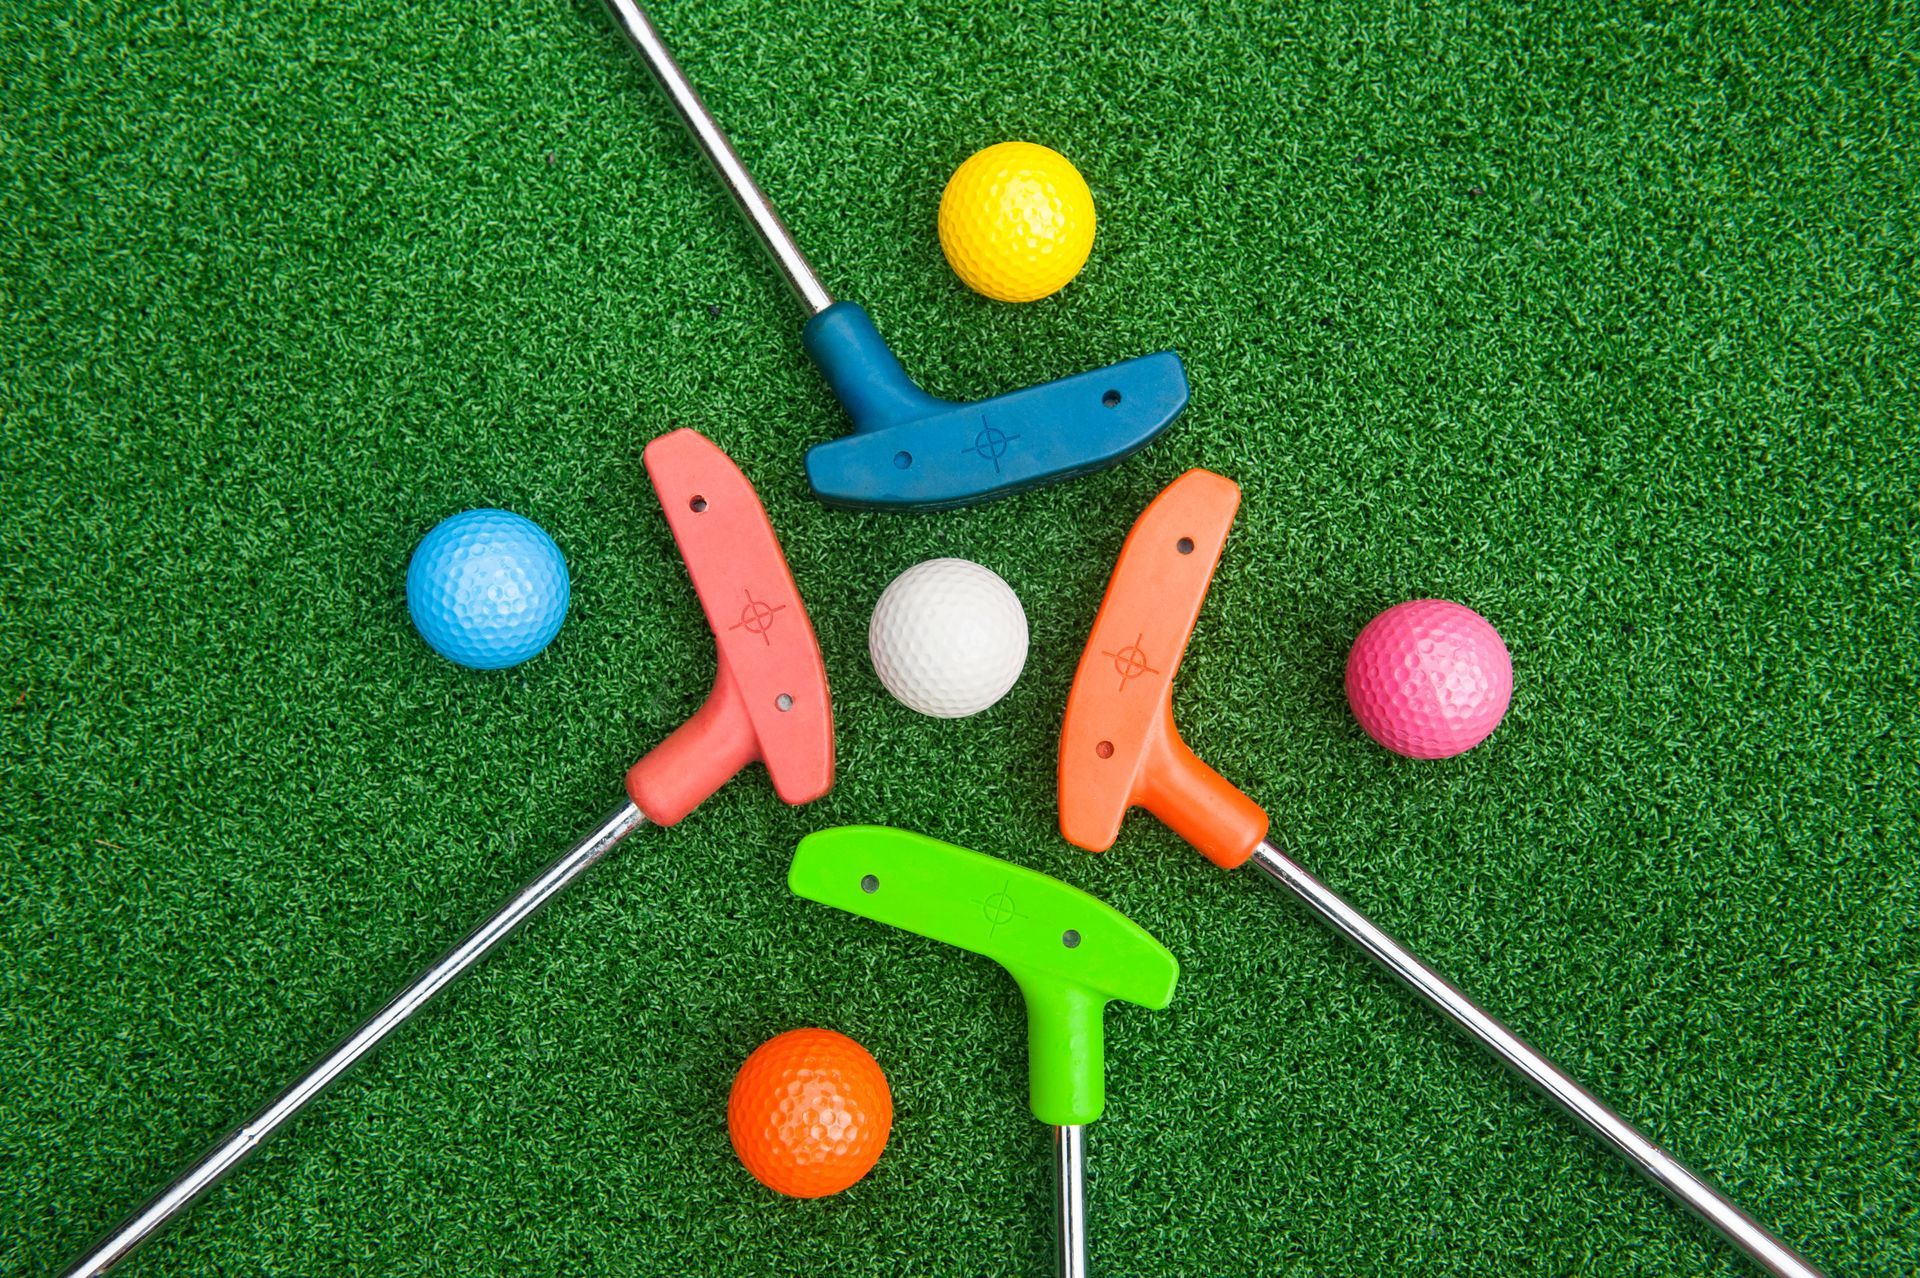 A group of mini golf balls and putters on a green field.